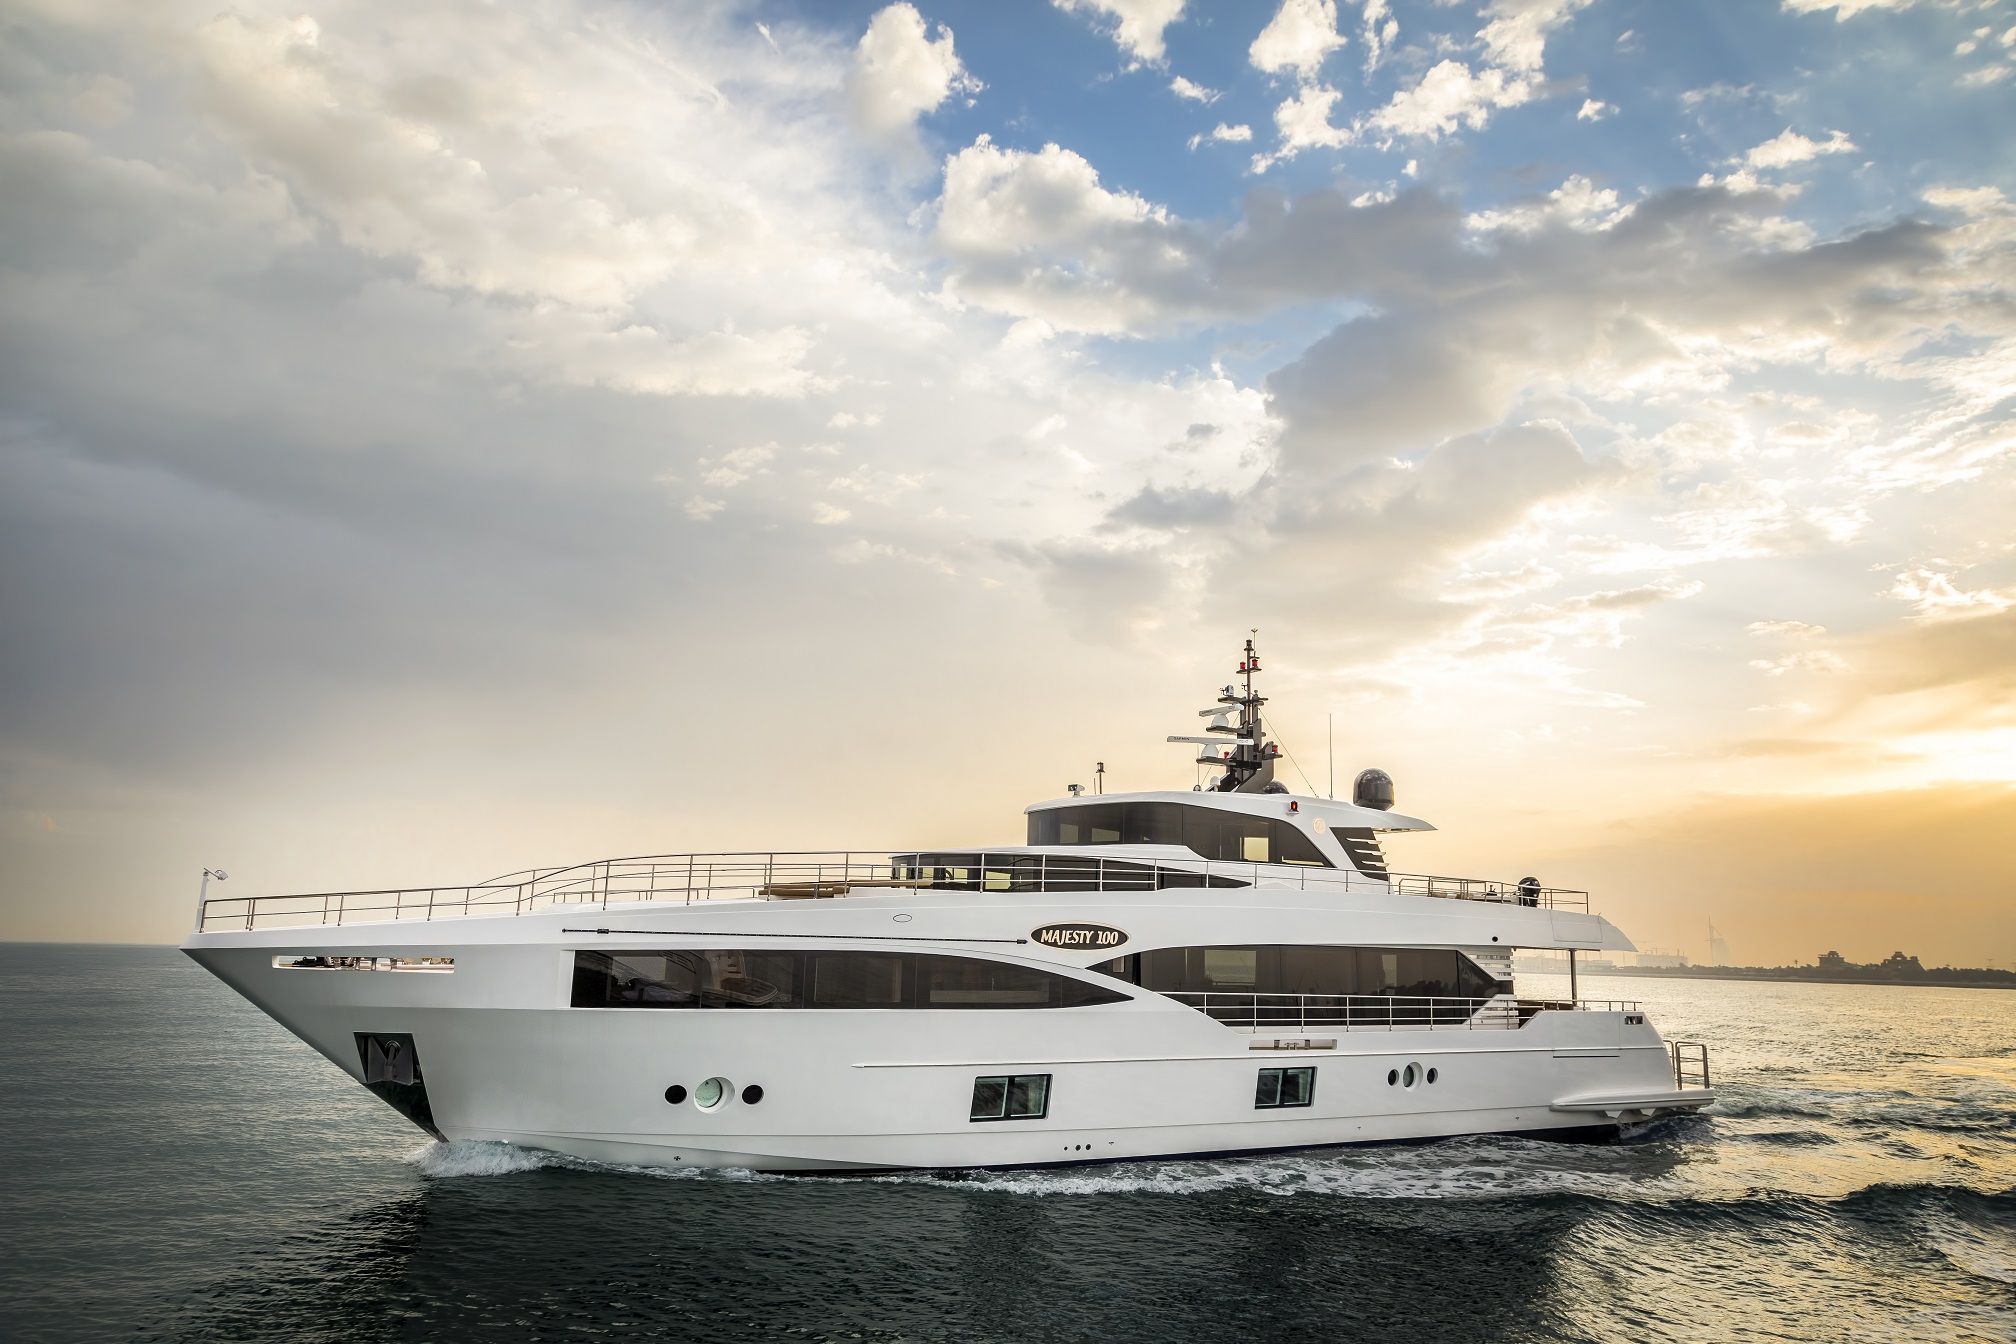 Gulf Craft Expands Footprint in Europe to Meet Growing Demand For Its Trend-Setting Composite Yachts